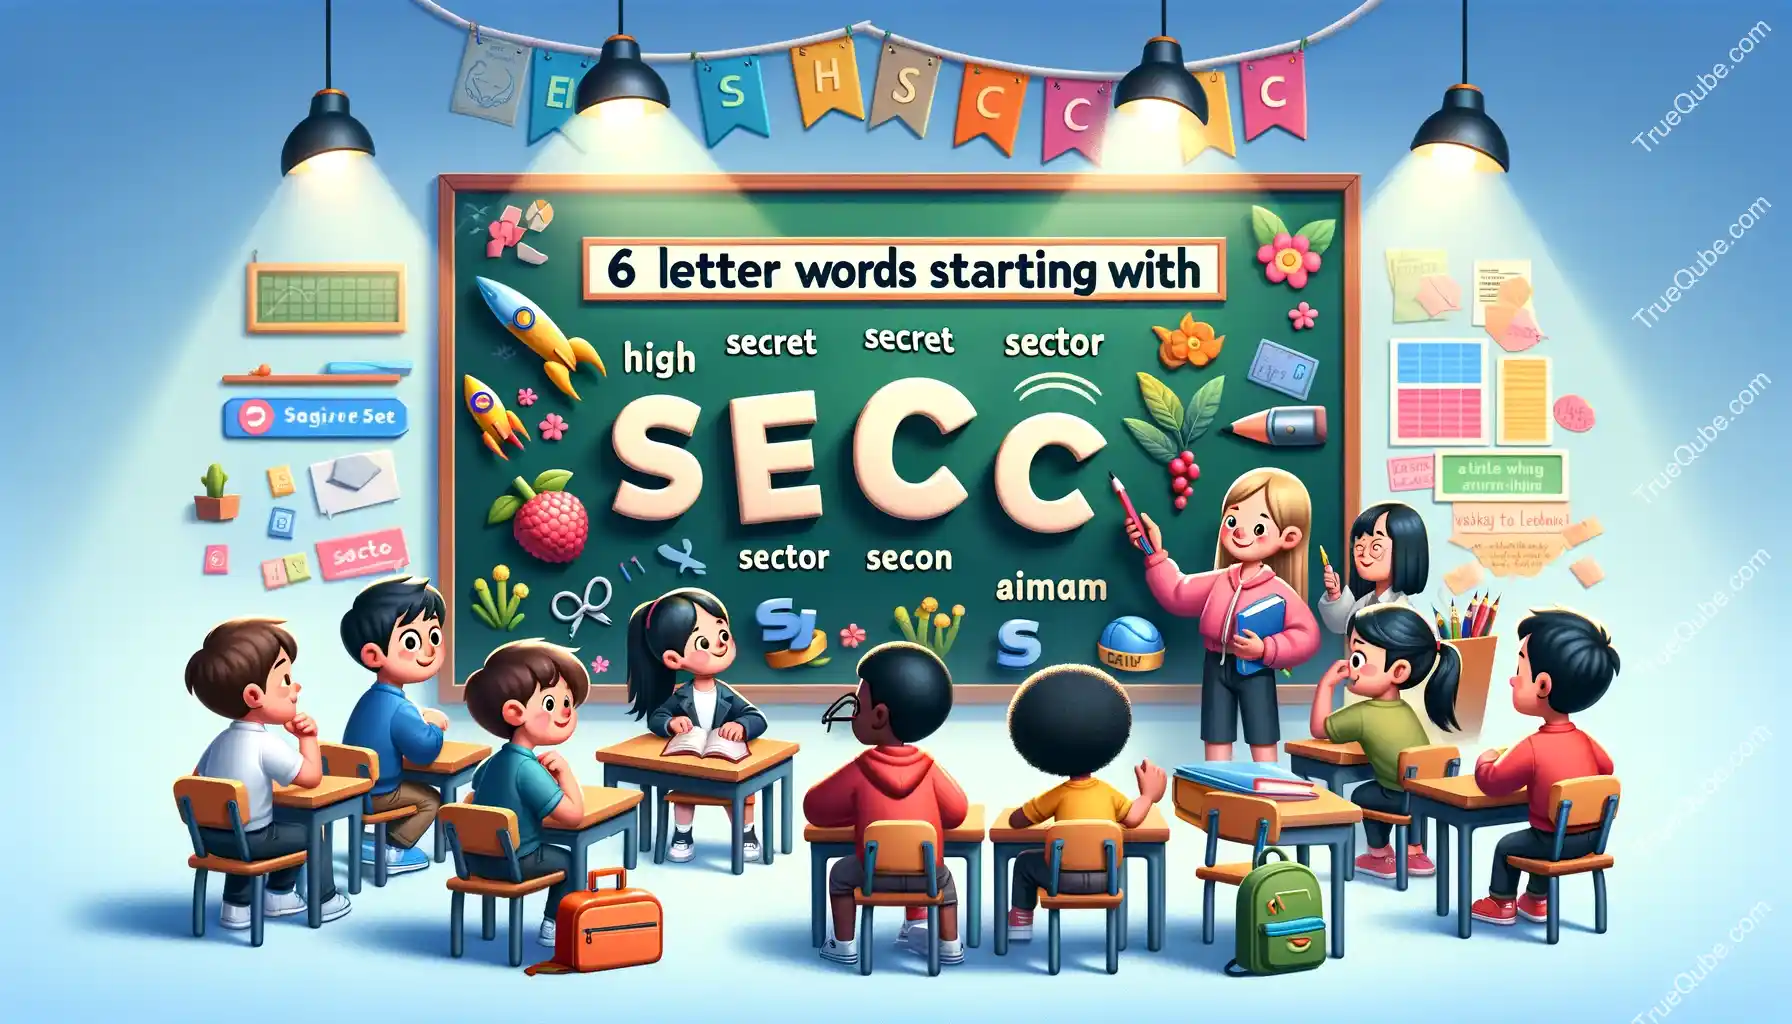 6 Letter Words Starting With SEC